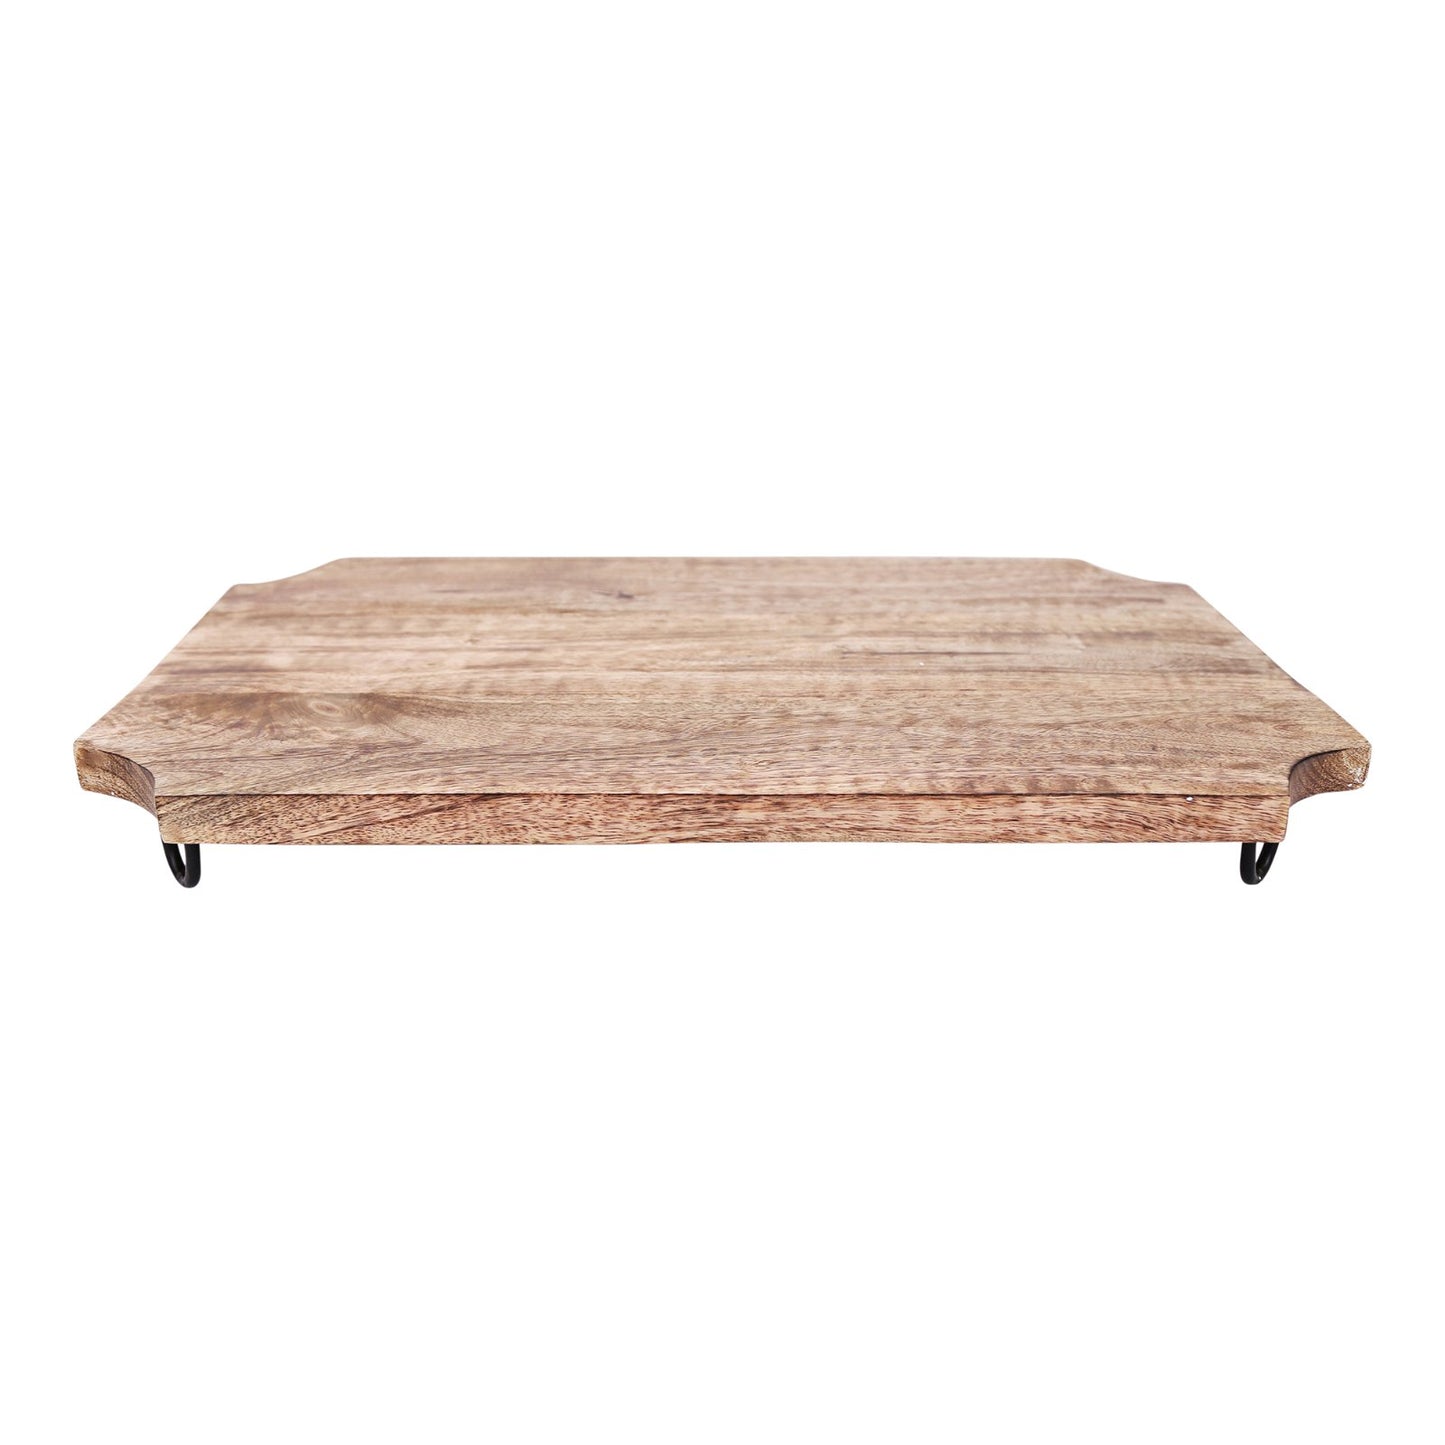 Wooden Distressed Chopping Board On Legs 51cm